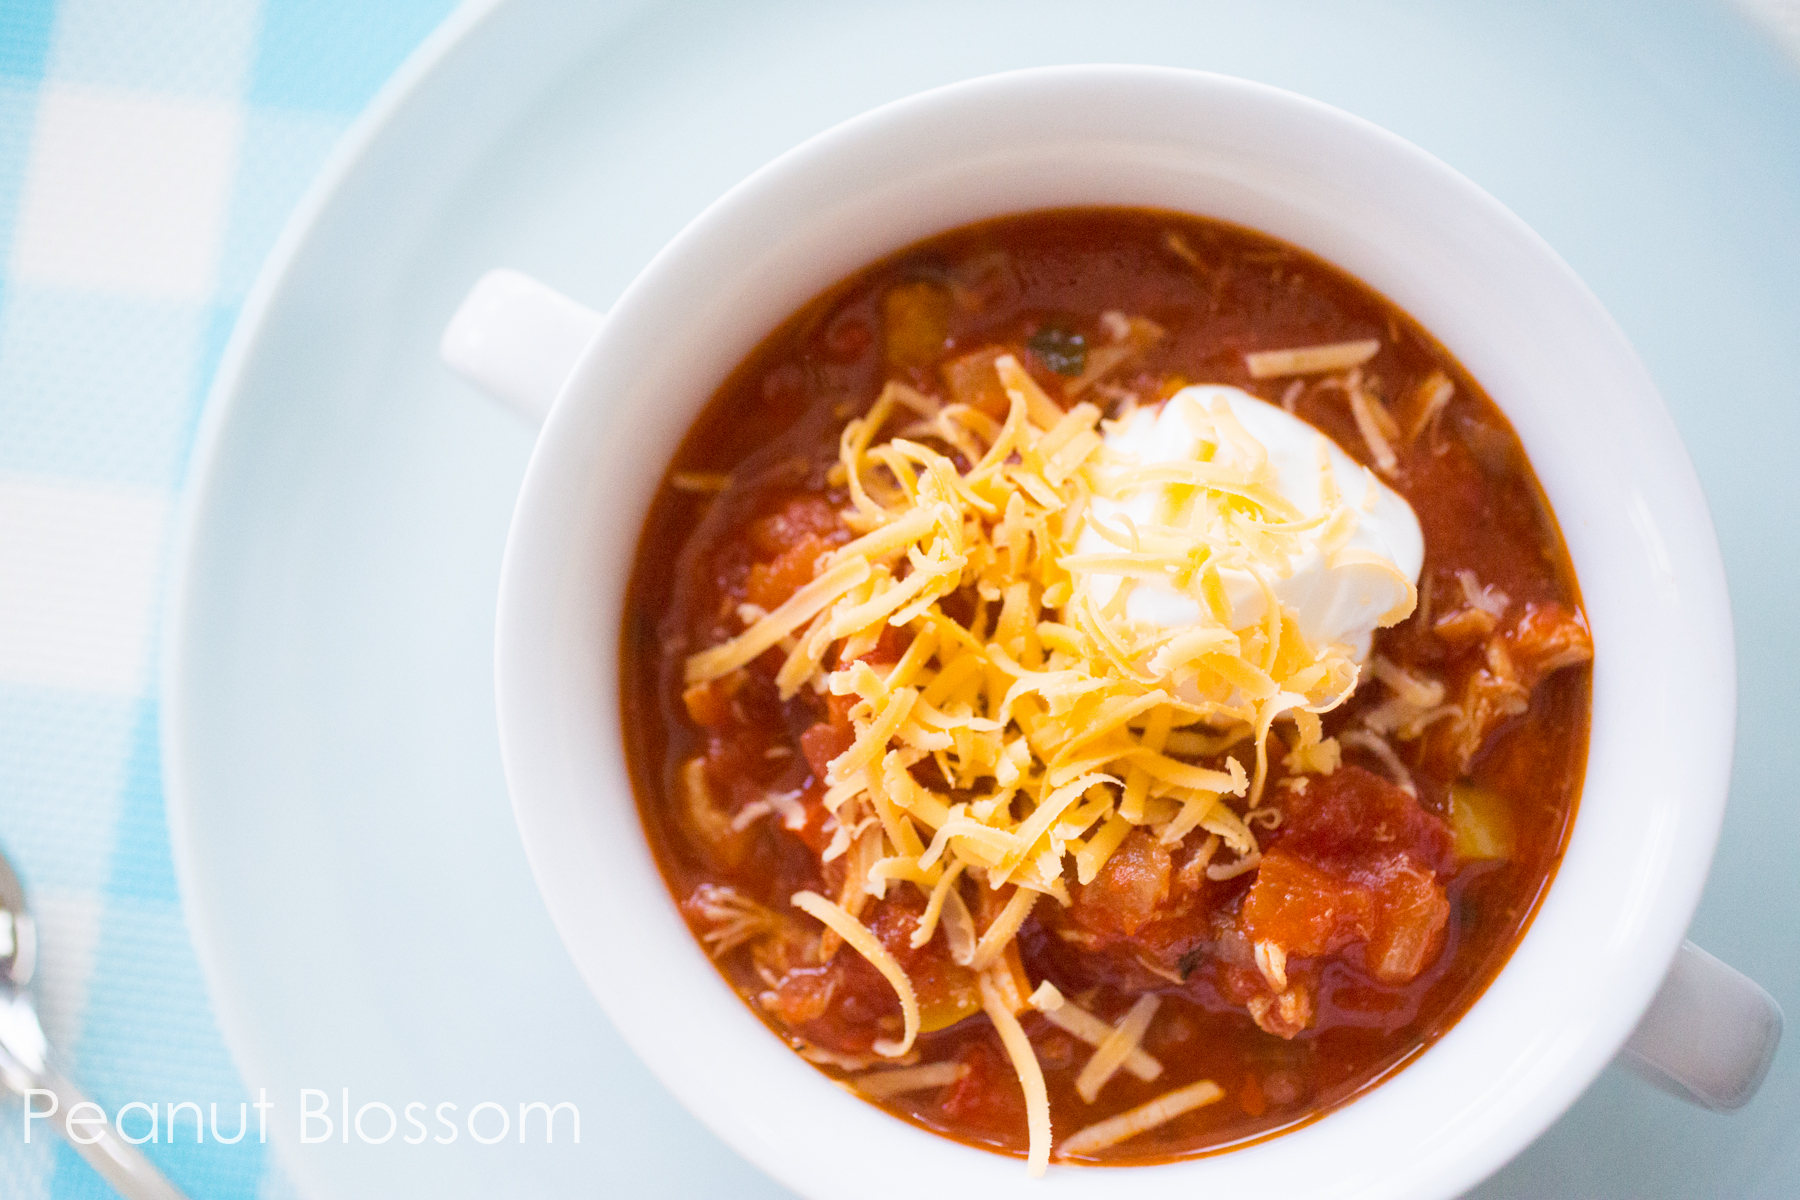 Homemade chicken chili: tons of veggies but NO beans! Only 3 WW points per serving.